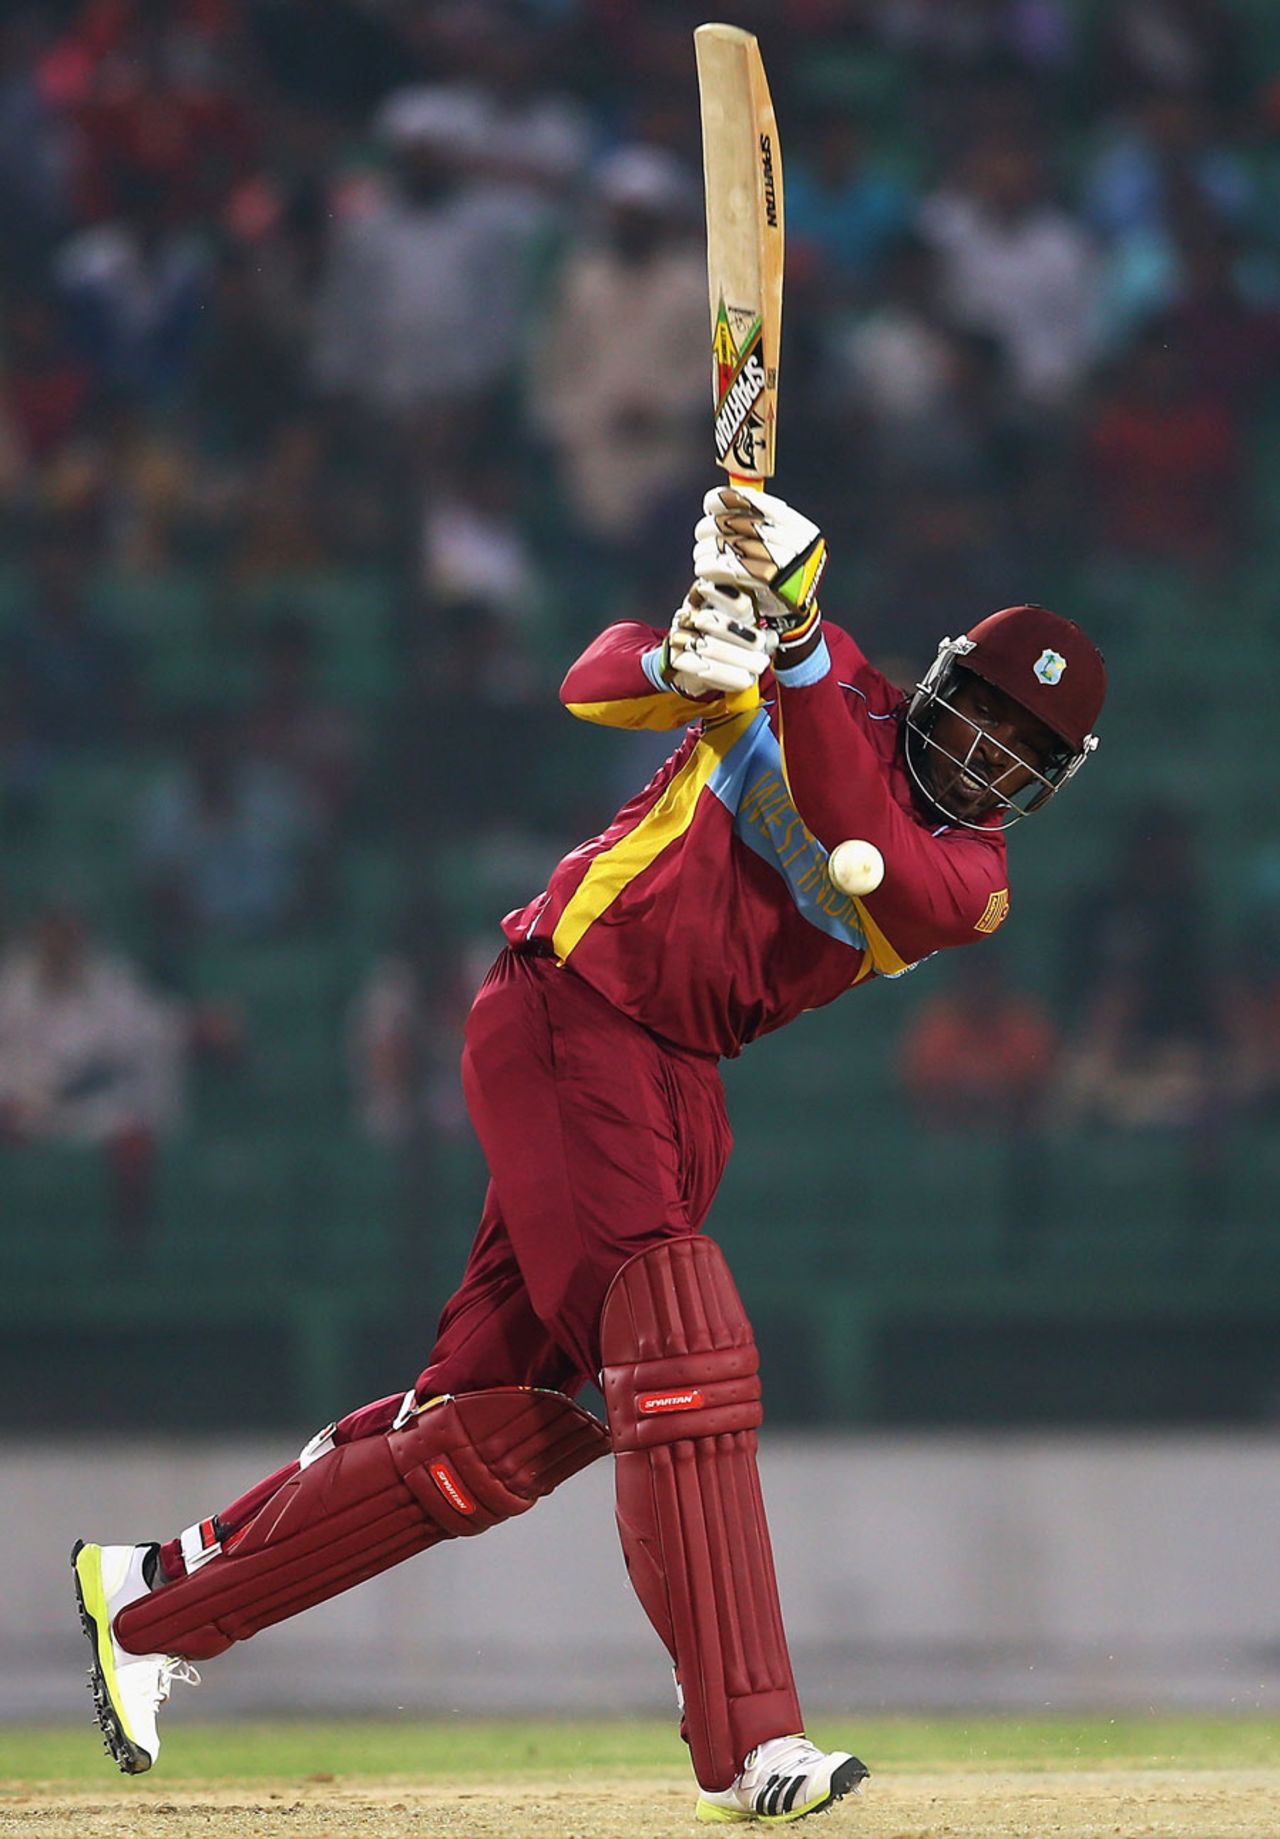 Chris Gayle saw West Indies home easily, England v West Indies, World T20 warm-up, Fatullah, March, 18, 2014